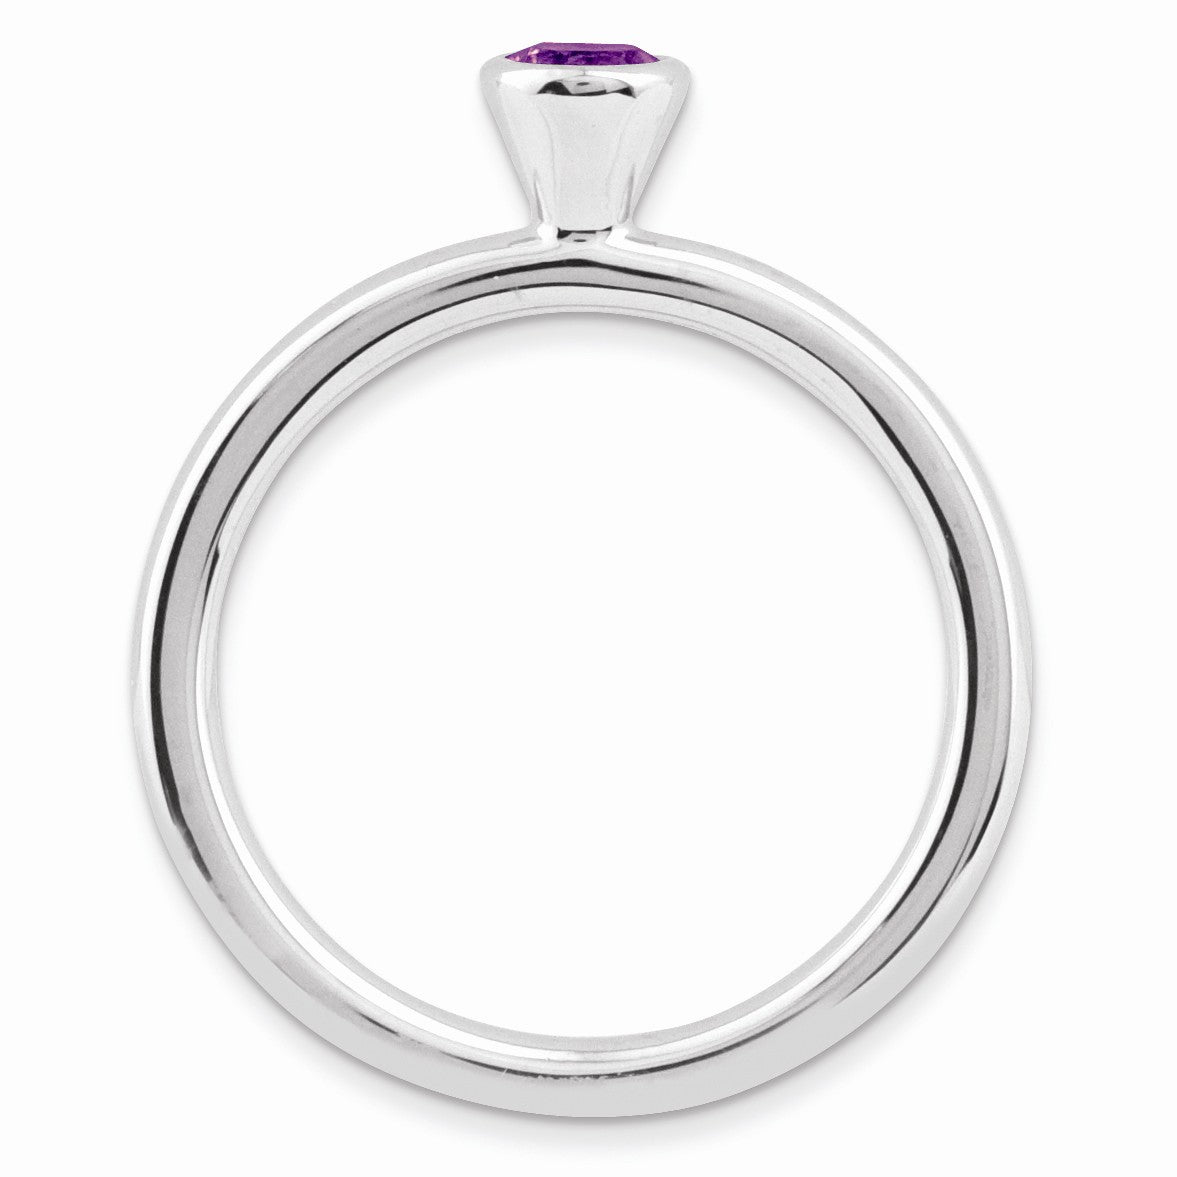 Alternate view of the Rhodium Plated Sterling Silver High Profile 4mm Amethyst Stack Ring by The Black Bow Jewelry Co.